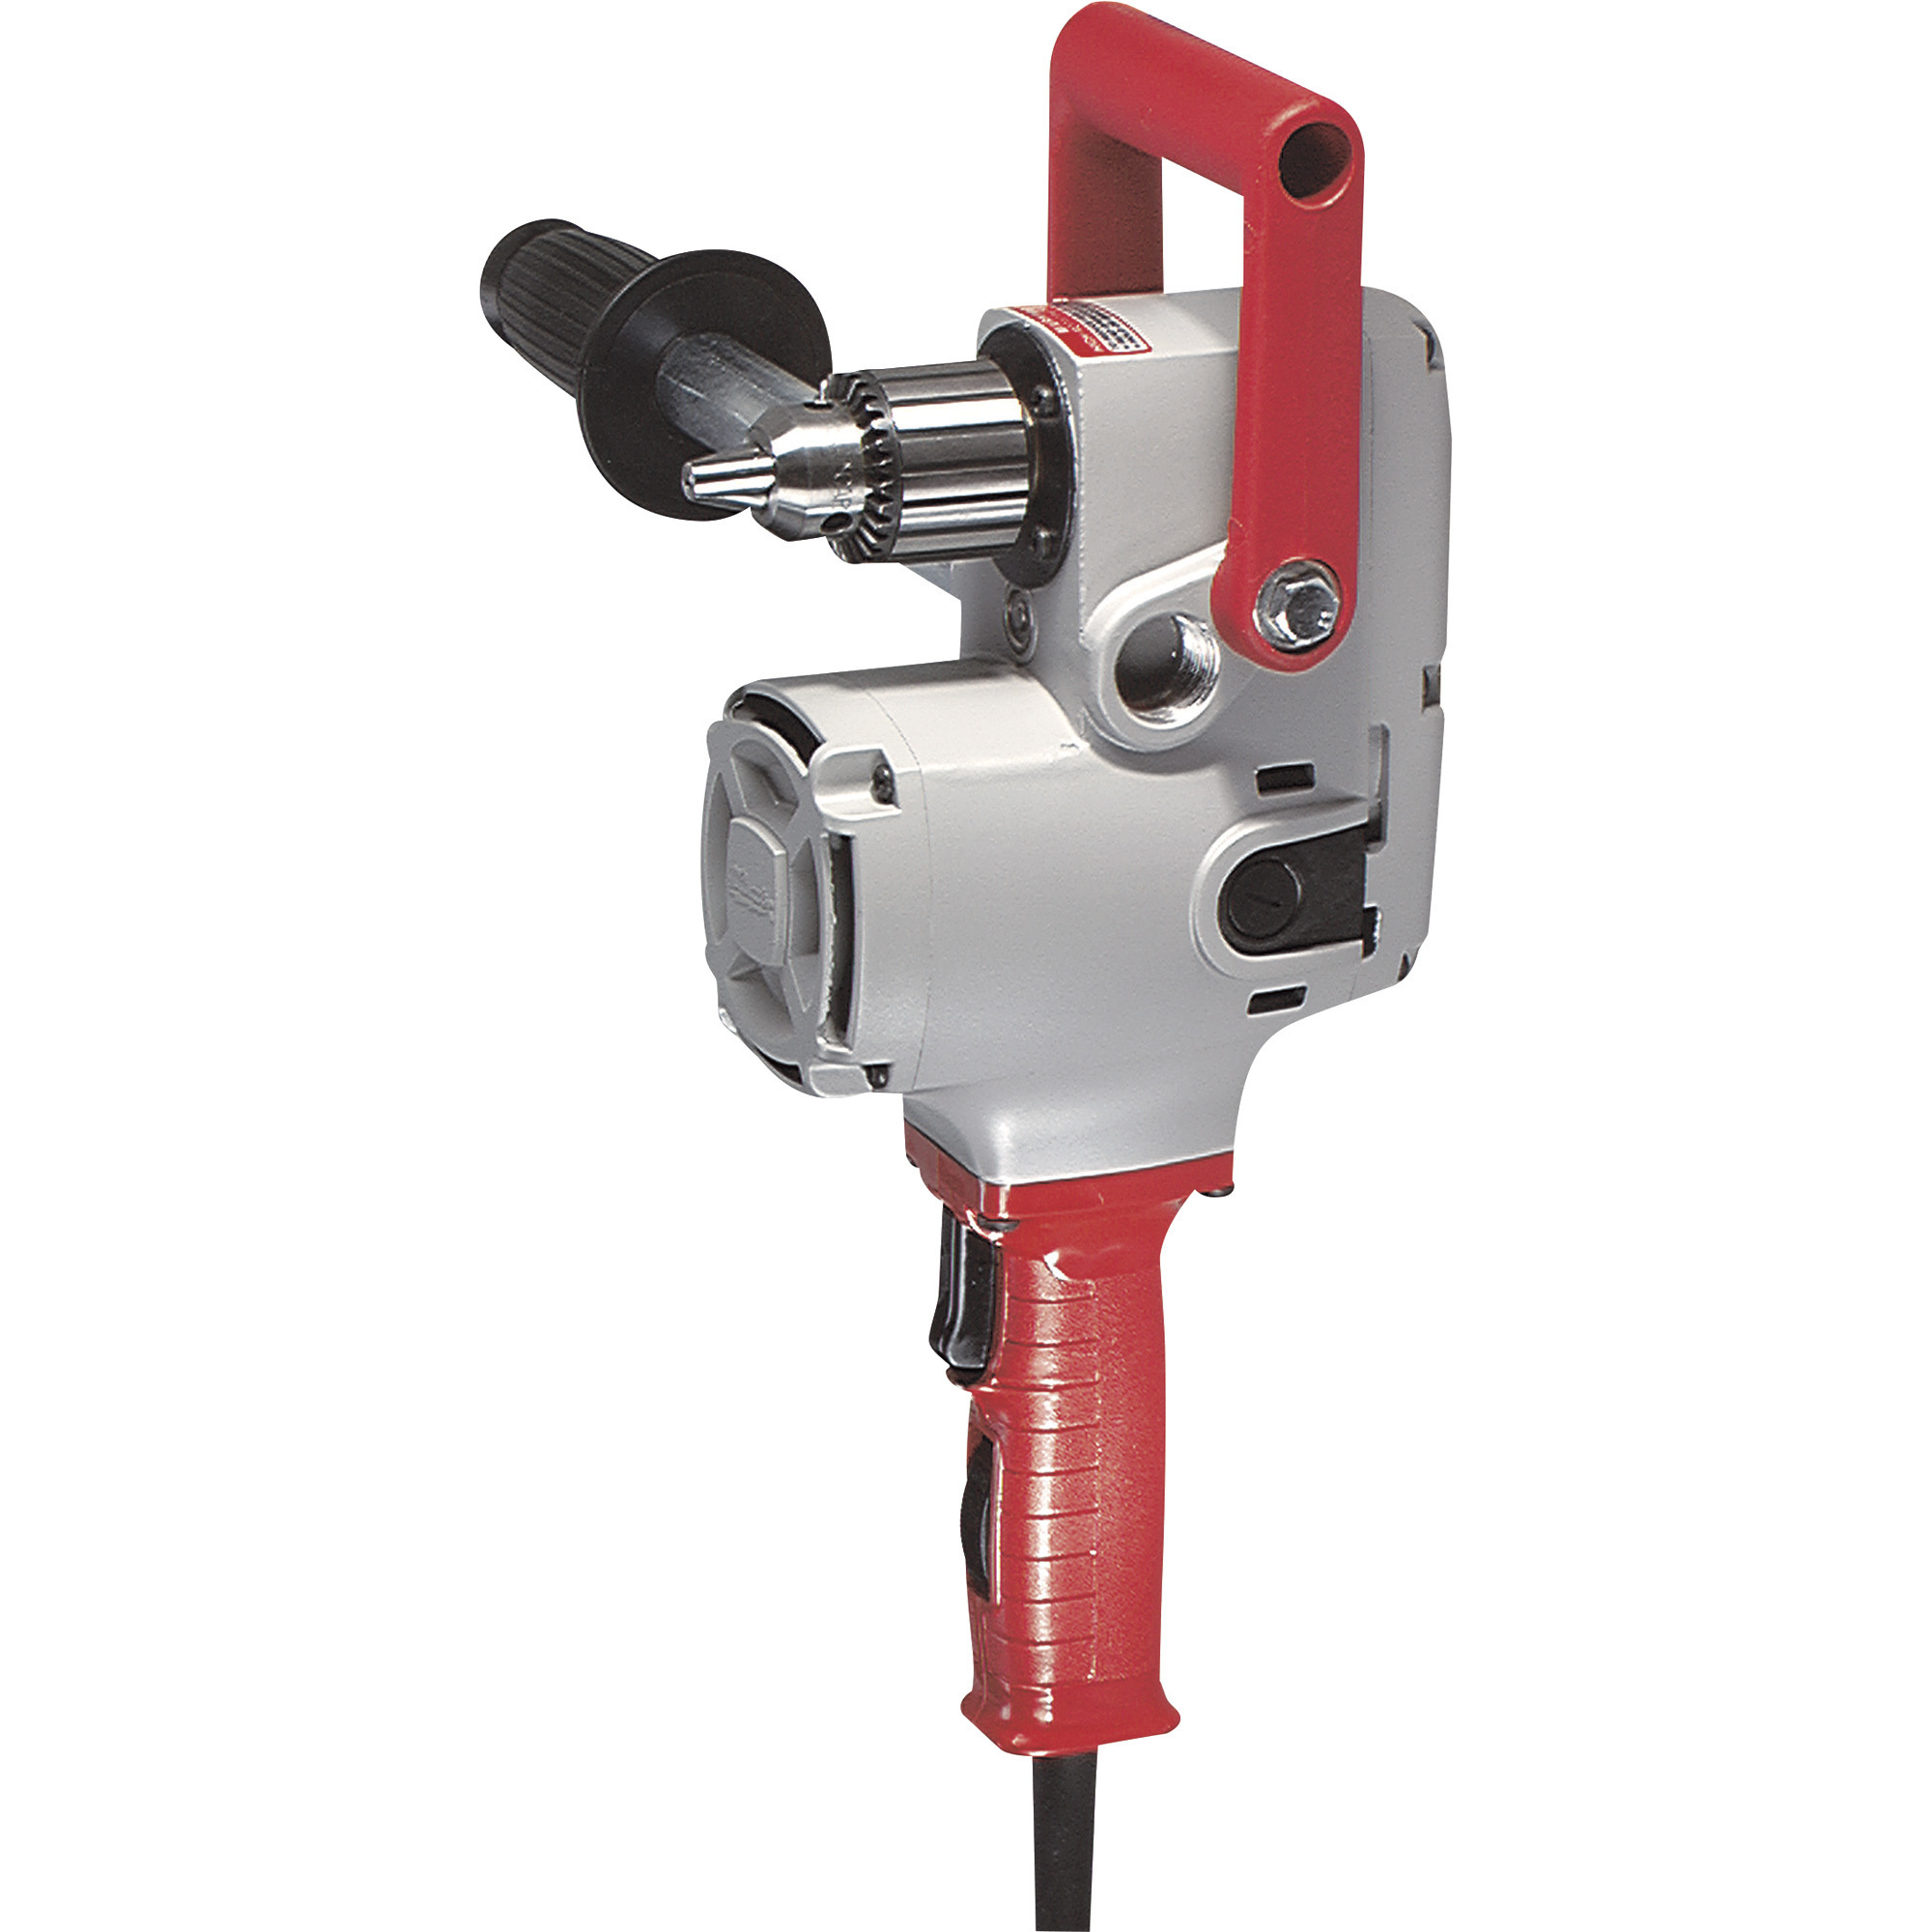 Milwaukee Hole Hawg Corded Electric Drill, 1/2Inch Keyed Chuck, 7.5 Amp, 1200 RPM, Model 1675-6